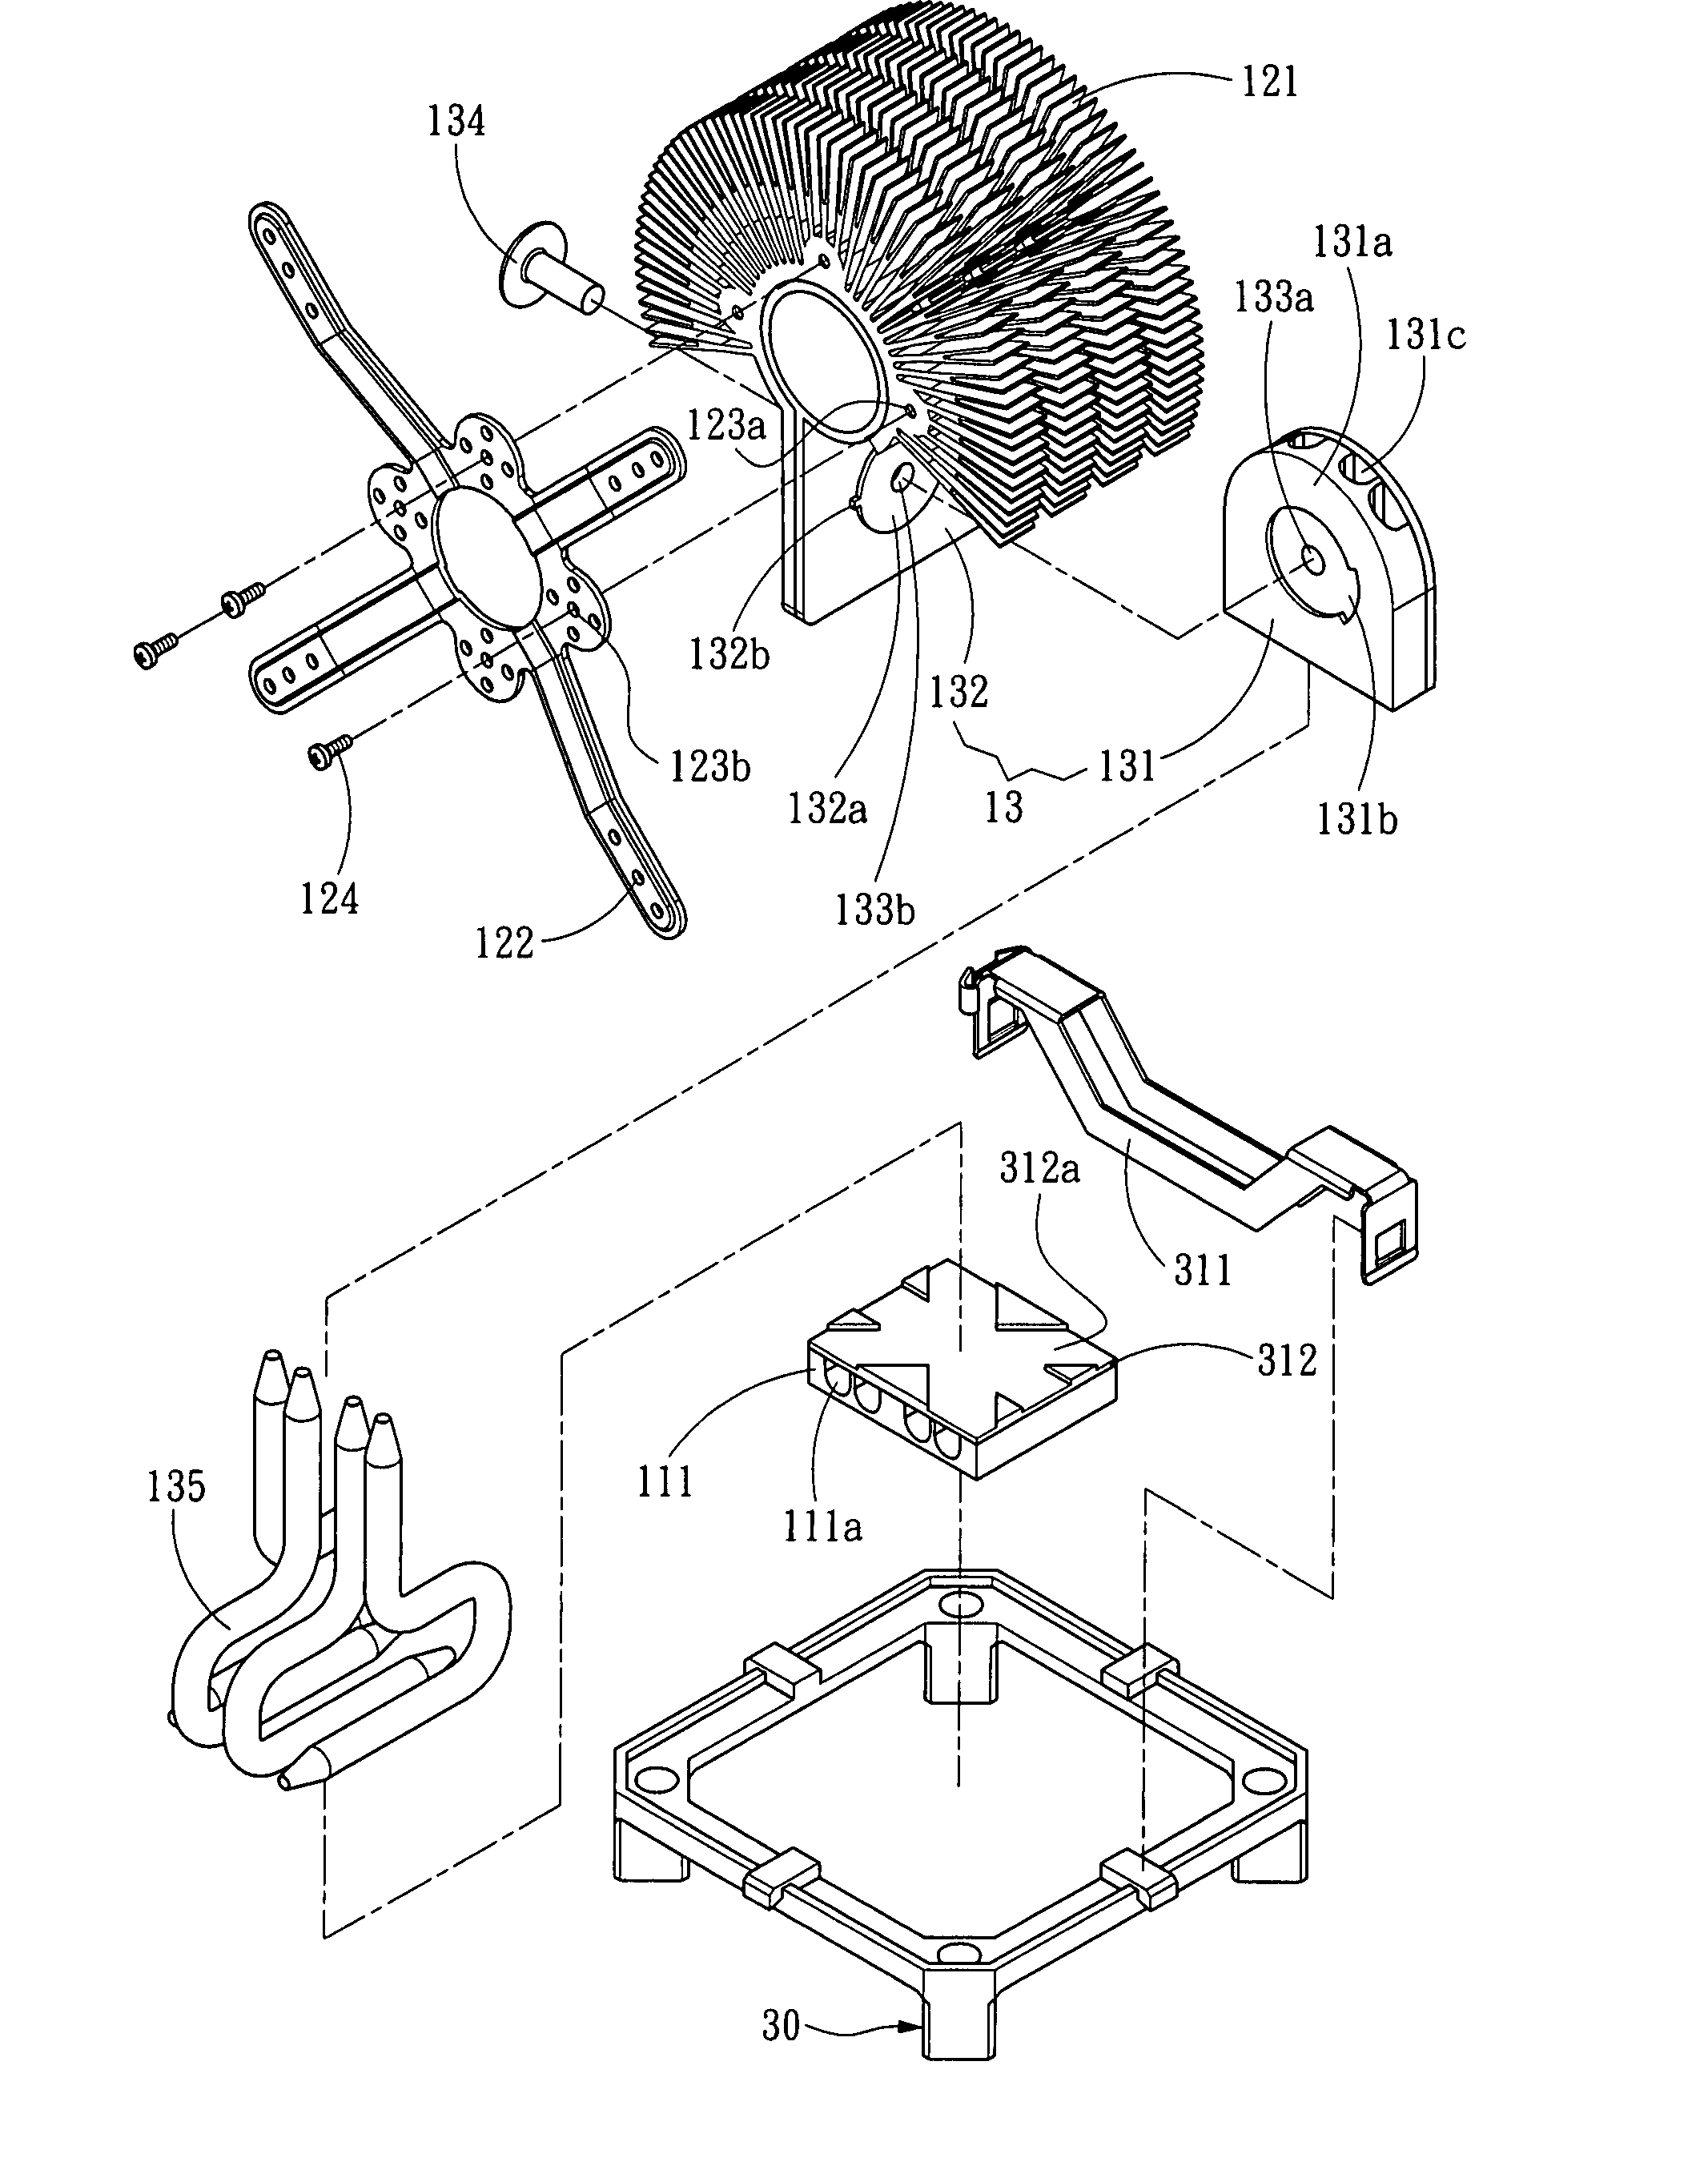 Adjustable cooling apparatus